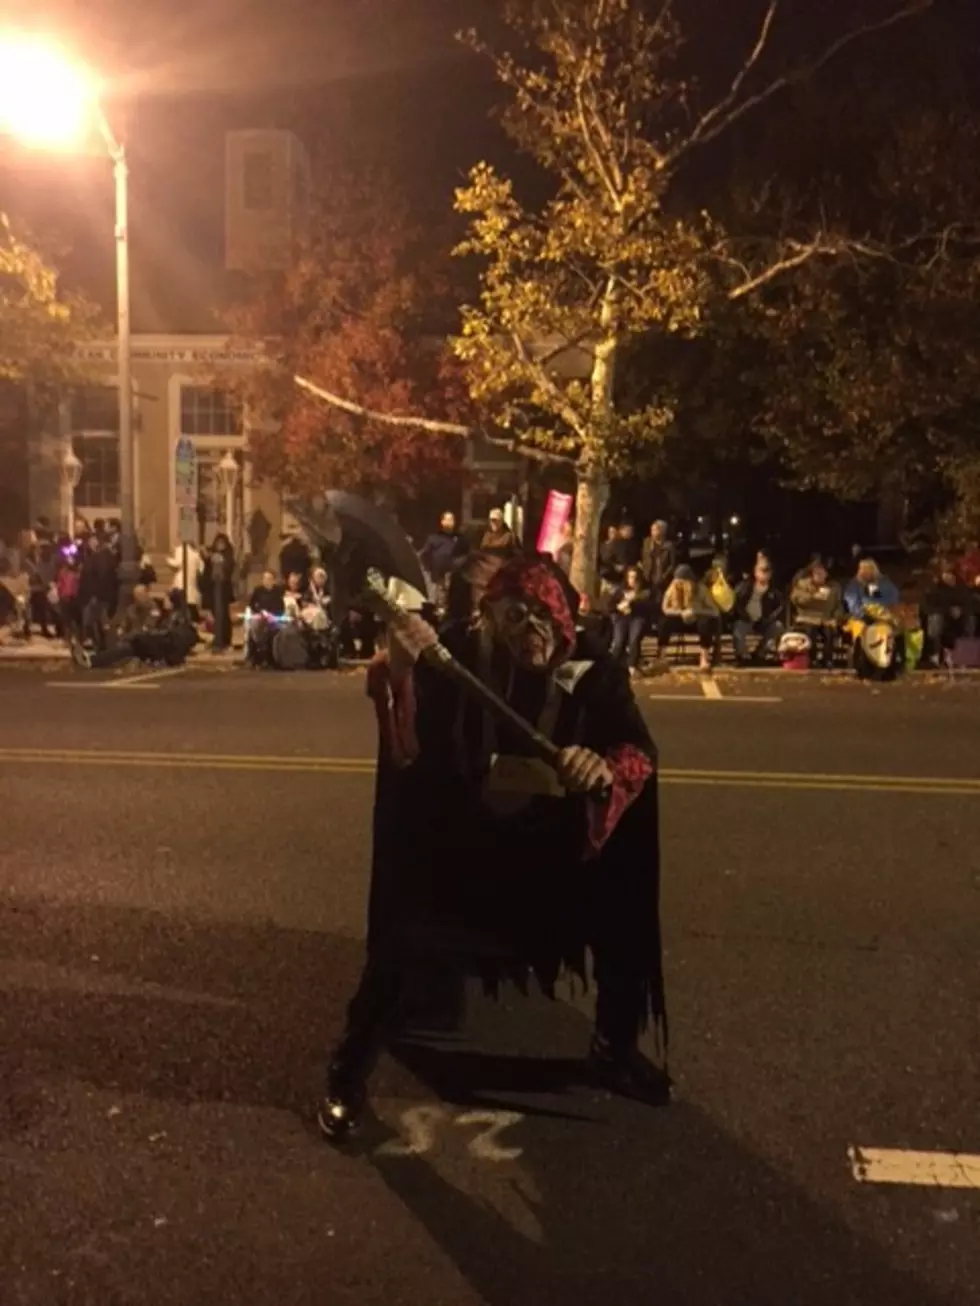 No advance placement of chairs along Toms River Halloween Parade route